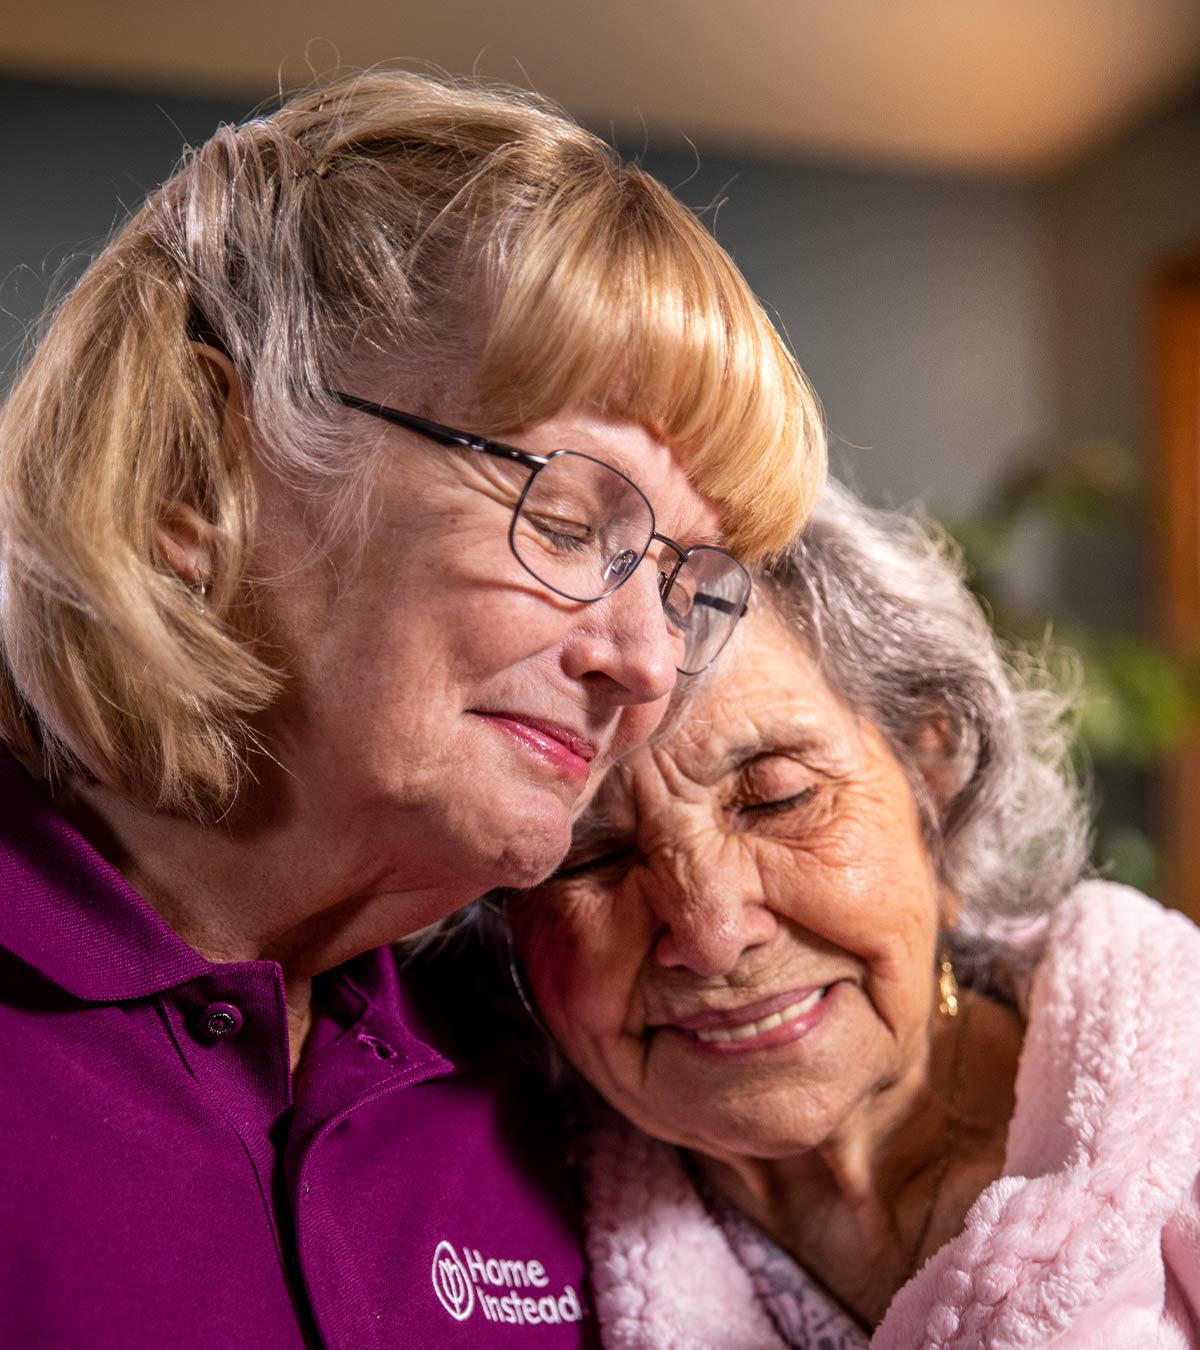 CAREGiver providing in-home senior care services. Home Instead of Alexandria, LA provides Elder Care to aging adults. 